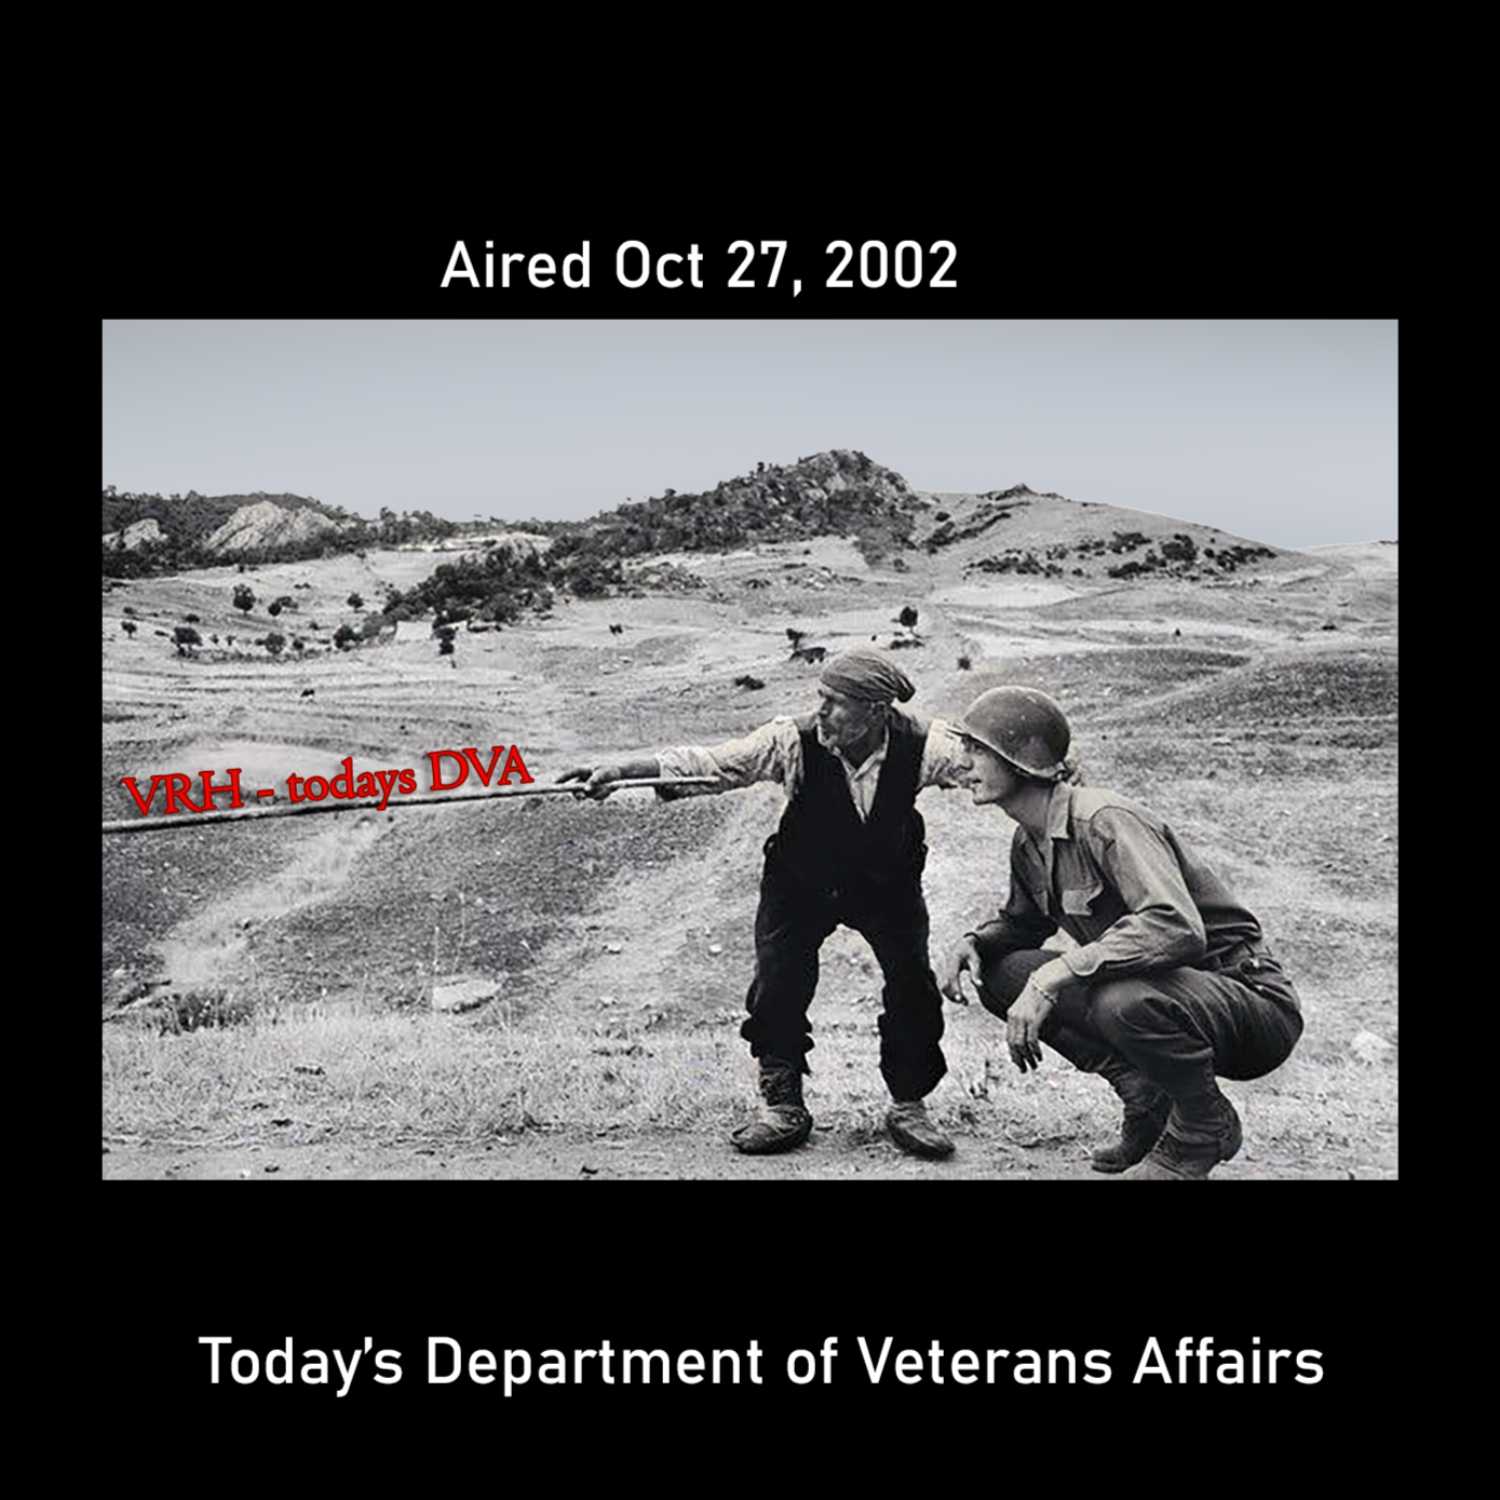 VRH - Today's Department of Veterans Affairs - aired Oct 27, 2002